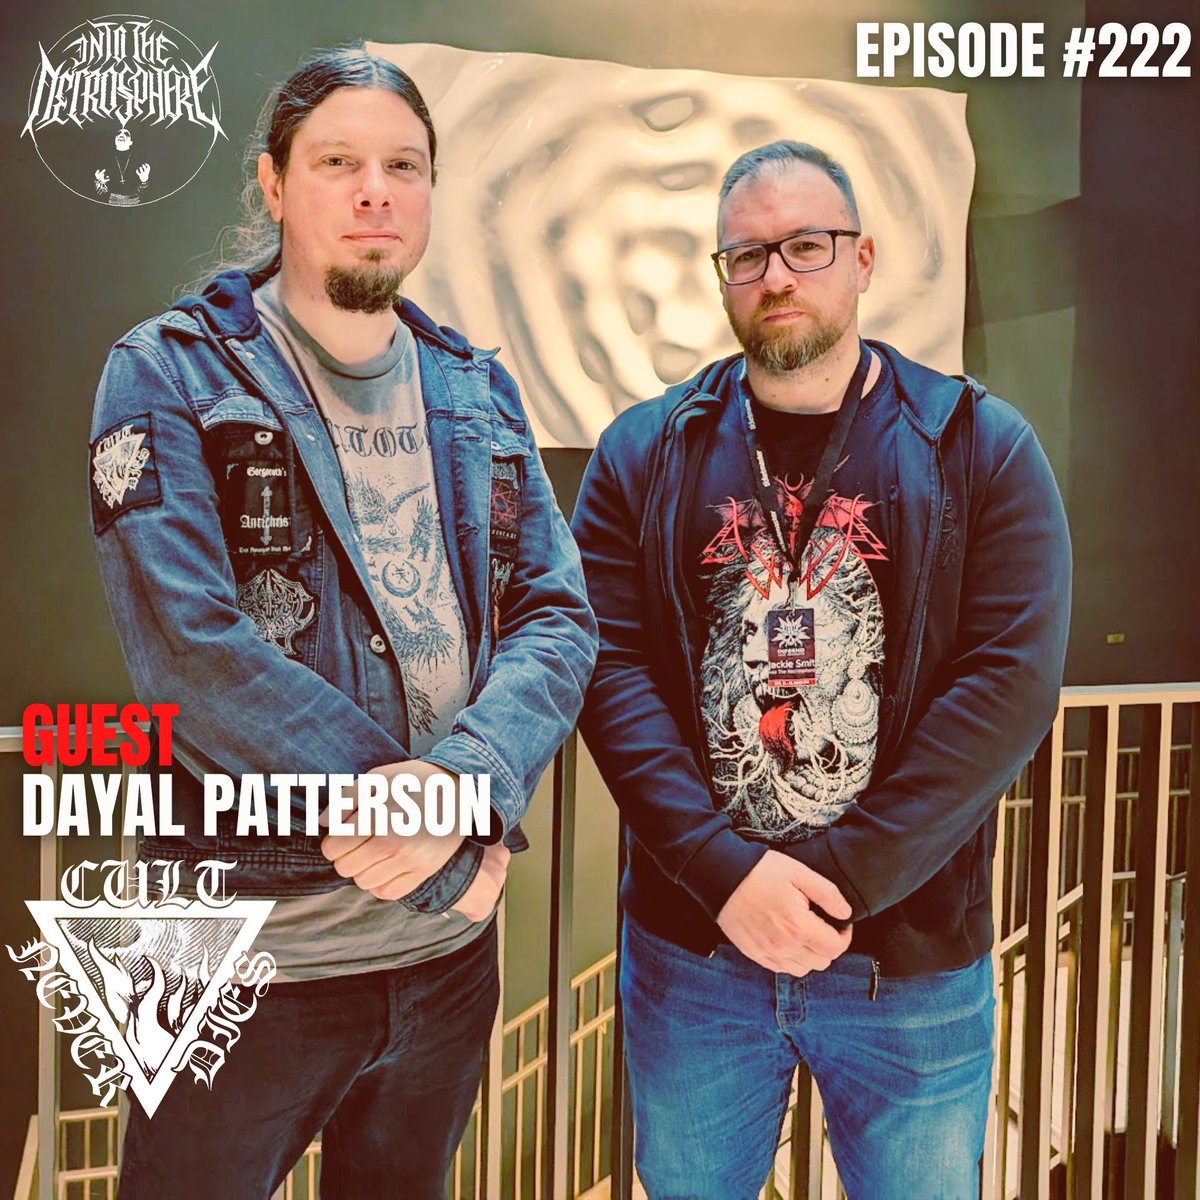 For this special Friday episode, I caught up with Dayal Patterson of Cult Never Dies at Inferno Festival in Norway.  We discussed the process  of writing indisputably the greatest book to chronicle black metal’s history ever published, “Black Metal: The Evolution Of The Cult”.